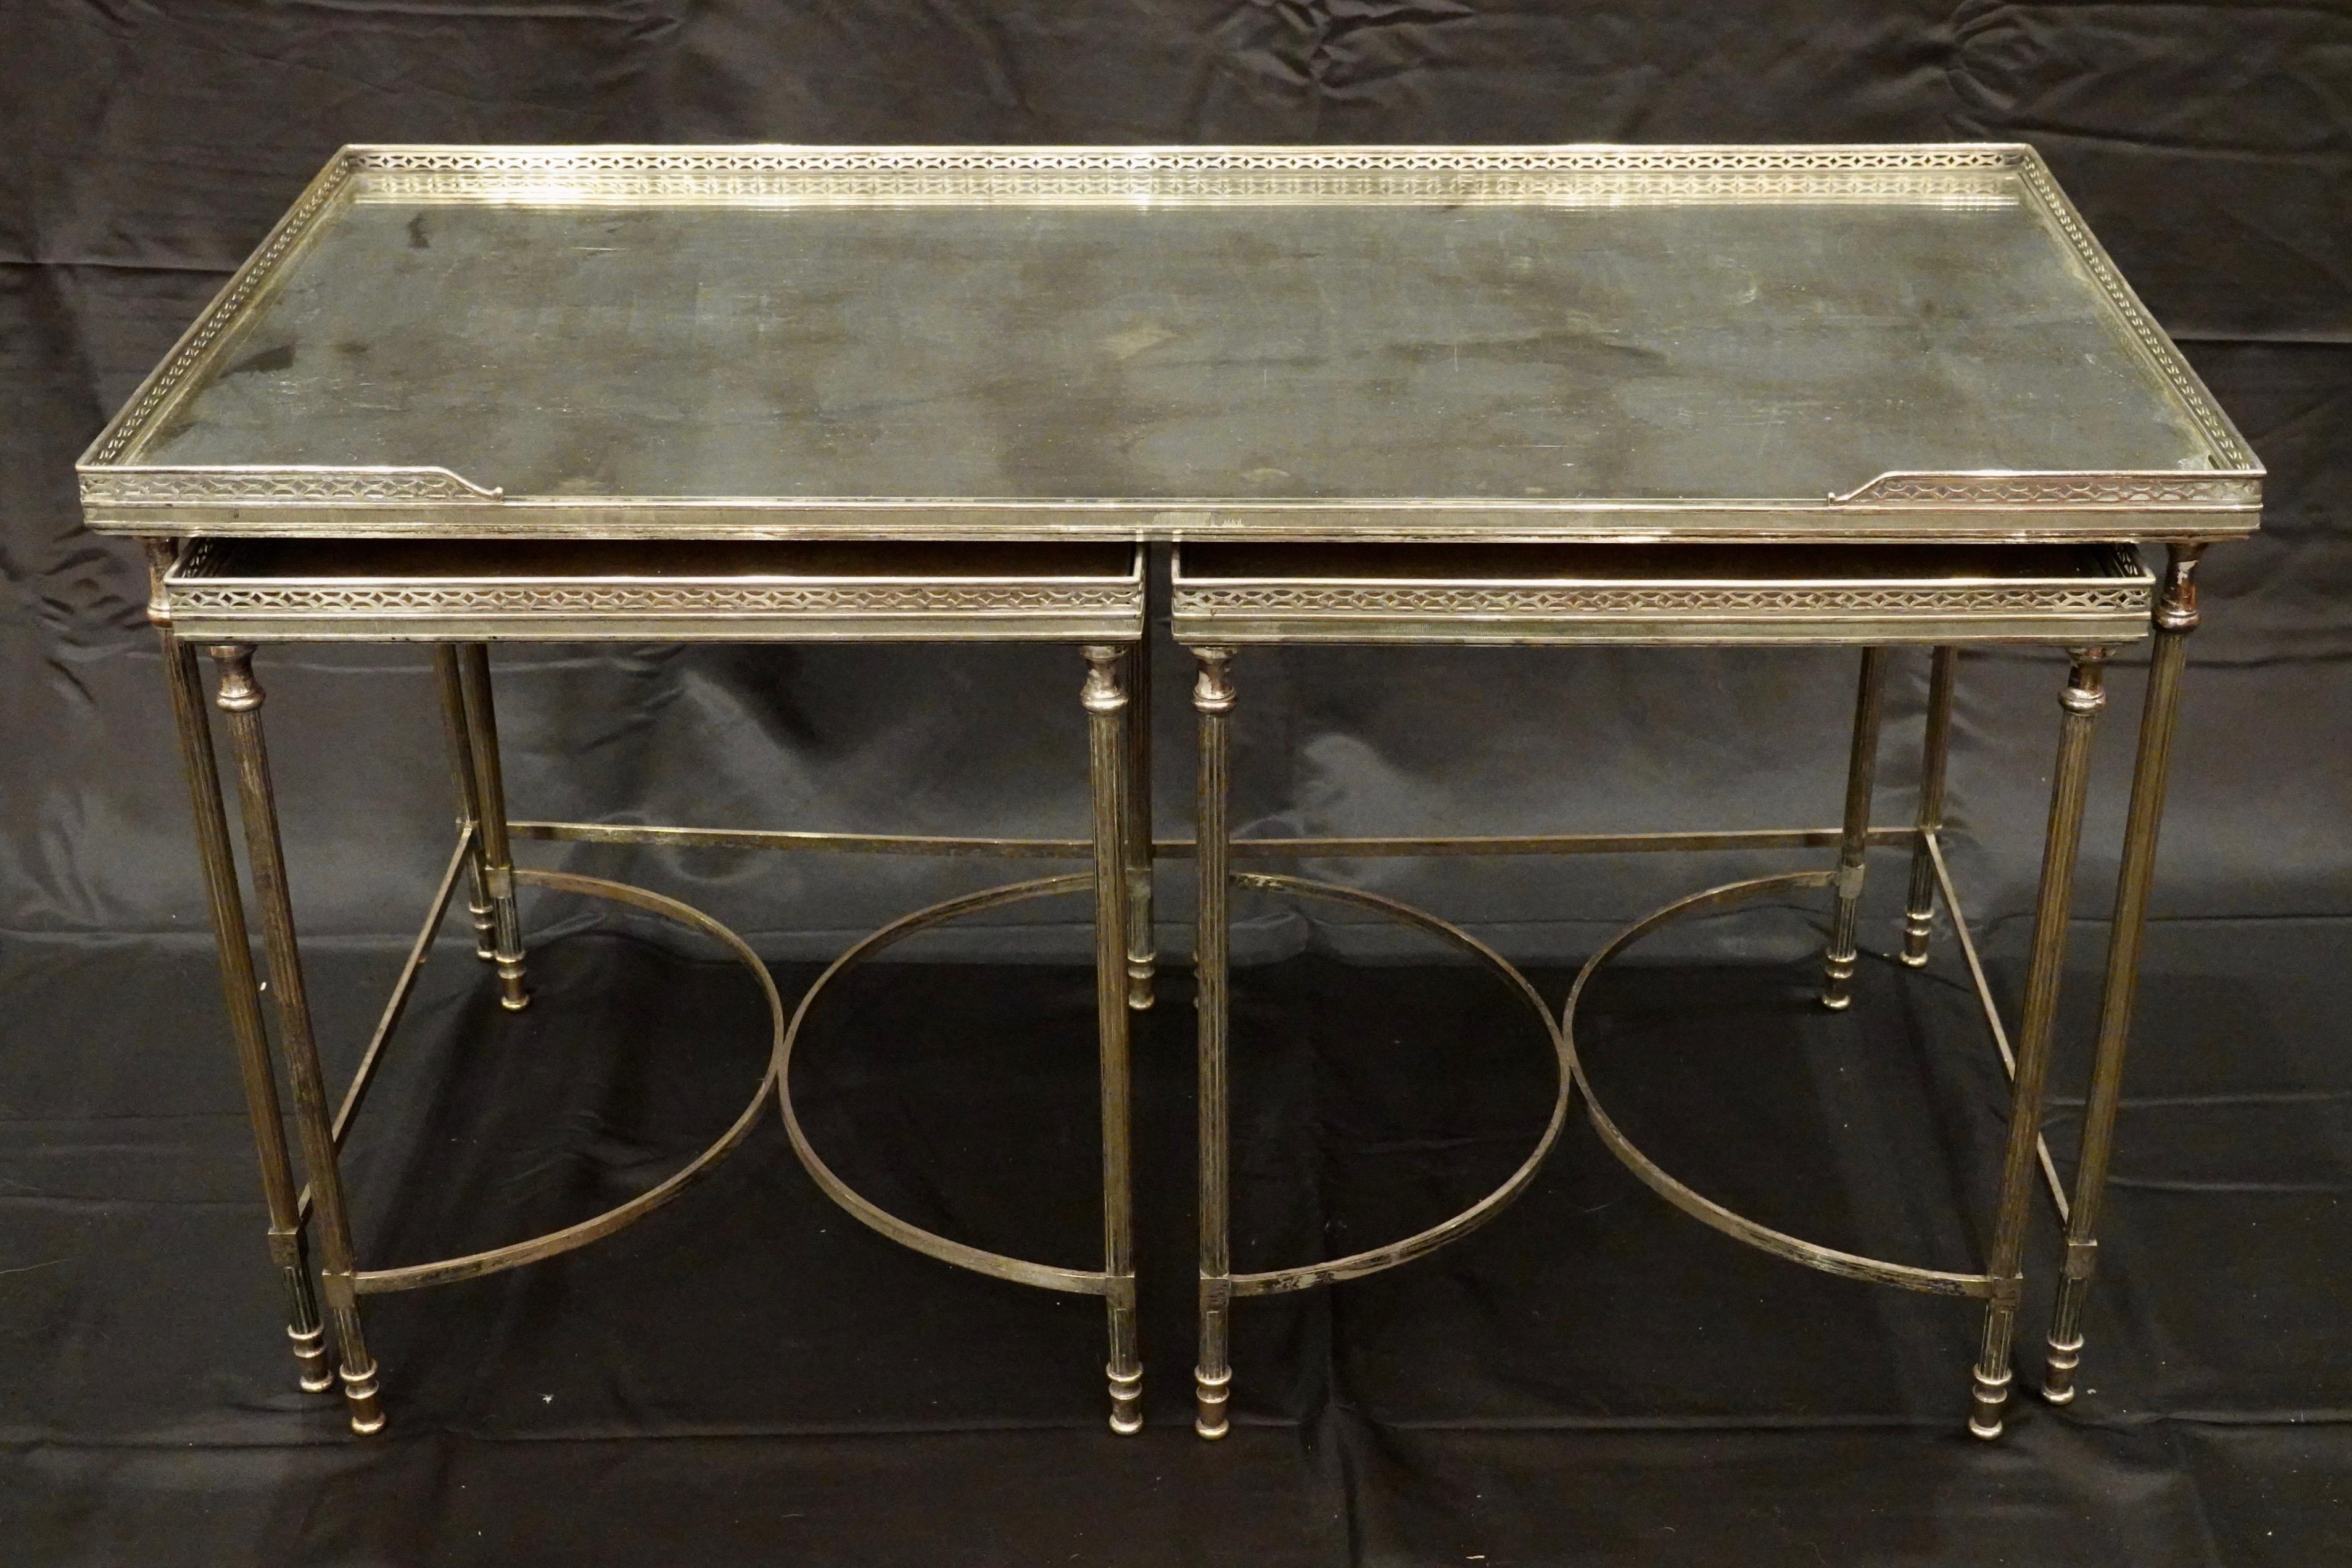 A set of three silvered-bronze tables comprising a coffee table and two matching side tables that nest under the coffee table. The tops are églomisé silver with tones of gold and grey veining. The tables feature an elegant neoclassical design with